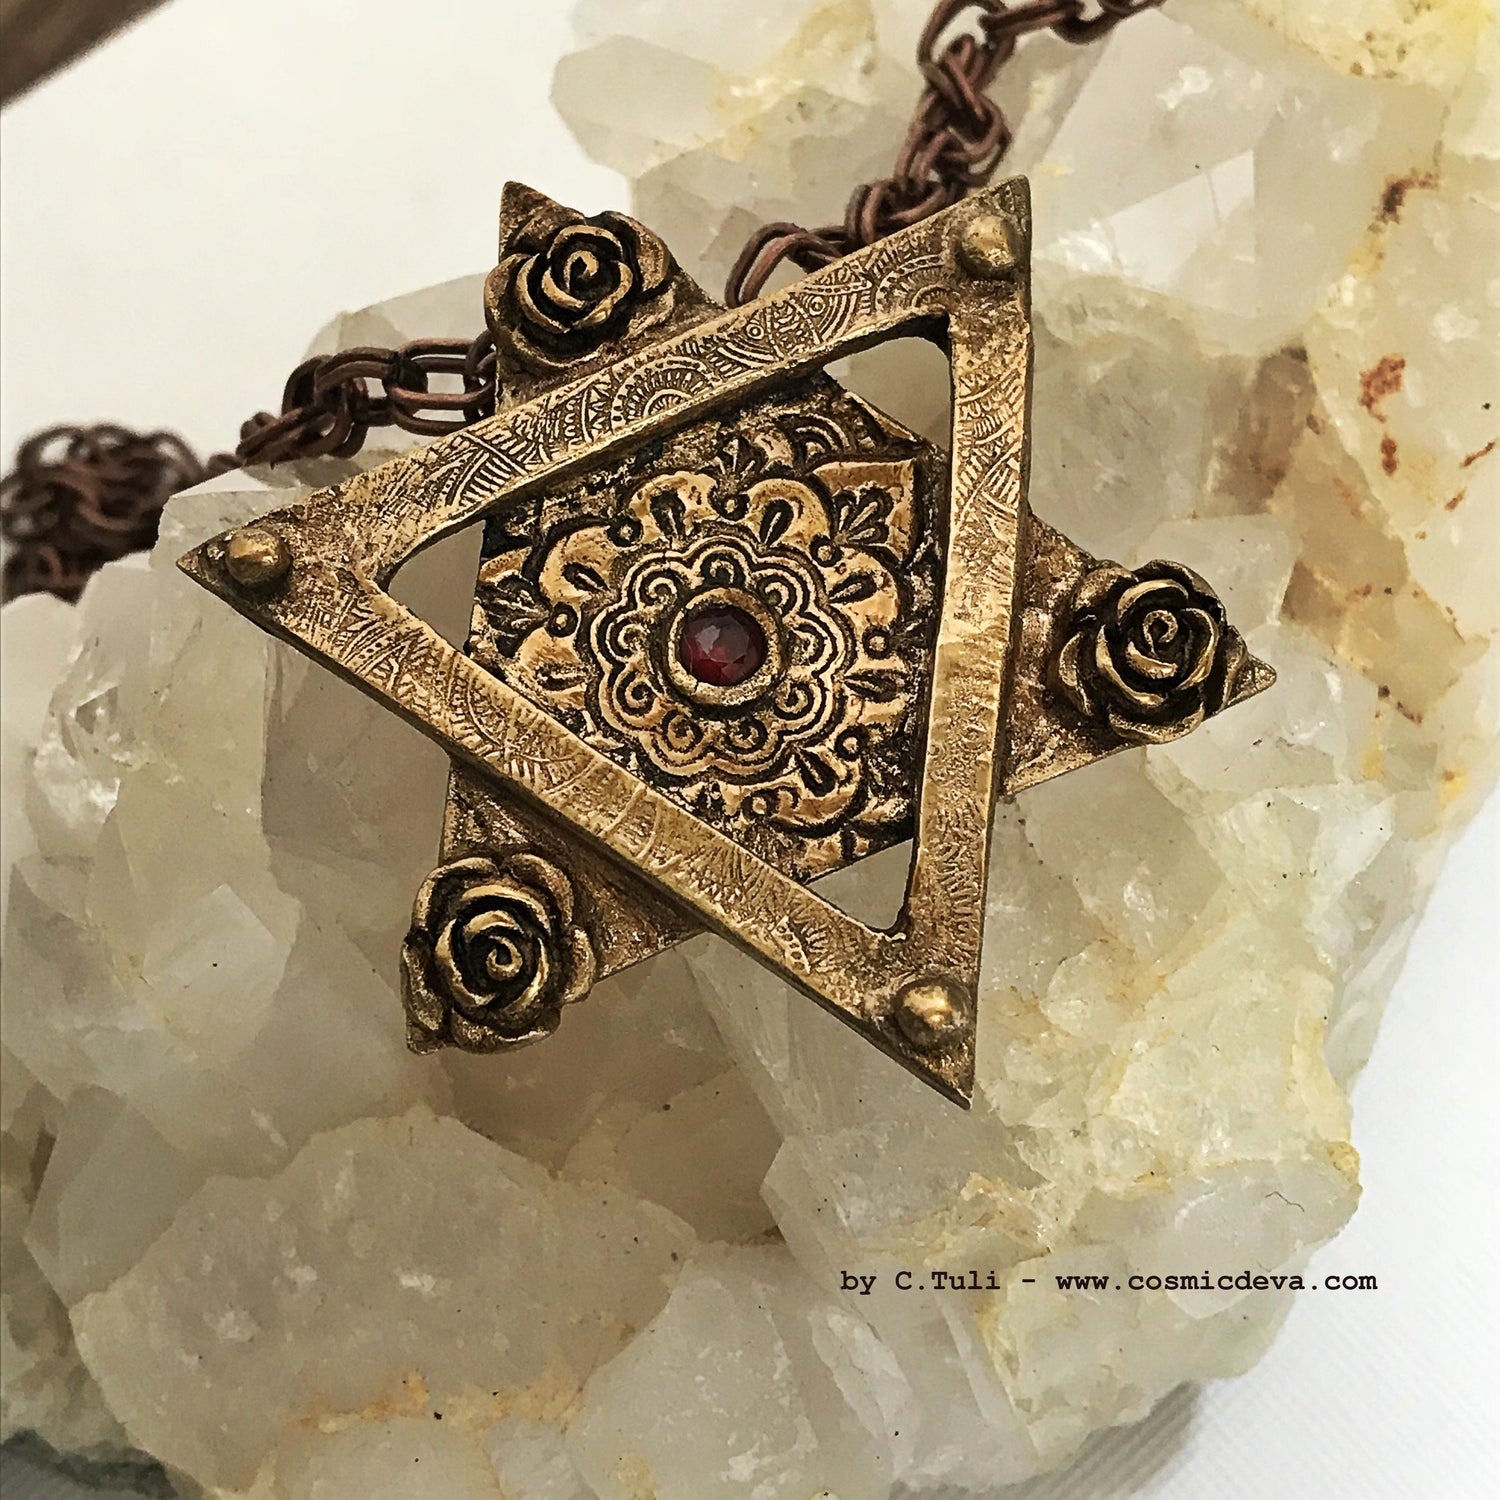 Be the star of any Bat Mitzvah with this exquisite Star of David Necklace! Crafted with an original hand-sculpted bronze design and featuring a red lab-grown garnet hessonite stone, this unique Magen David pendant will add a touch of elegance and tradition to your special day. - CosmicDeva